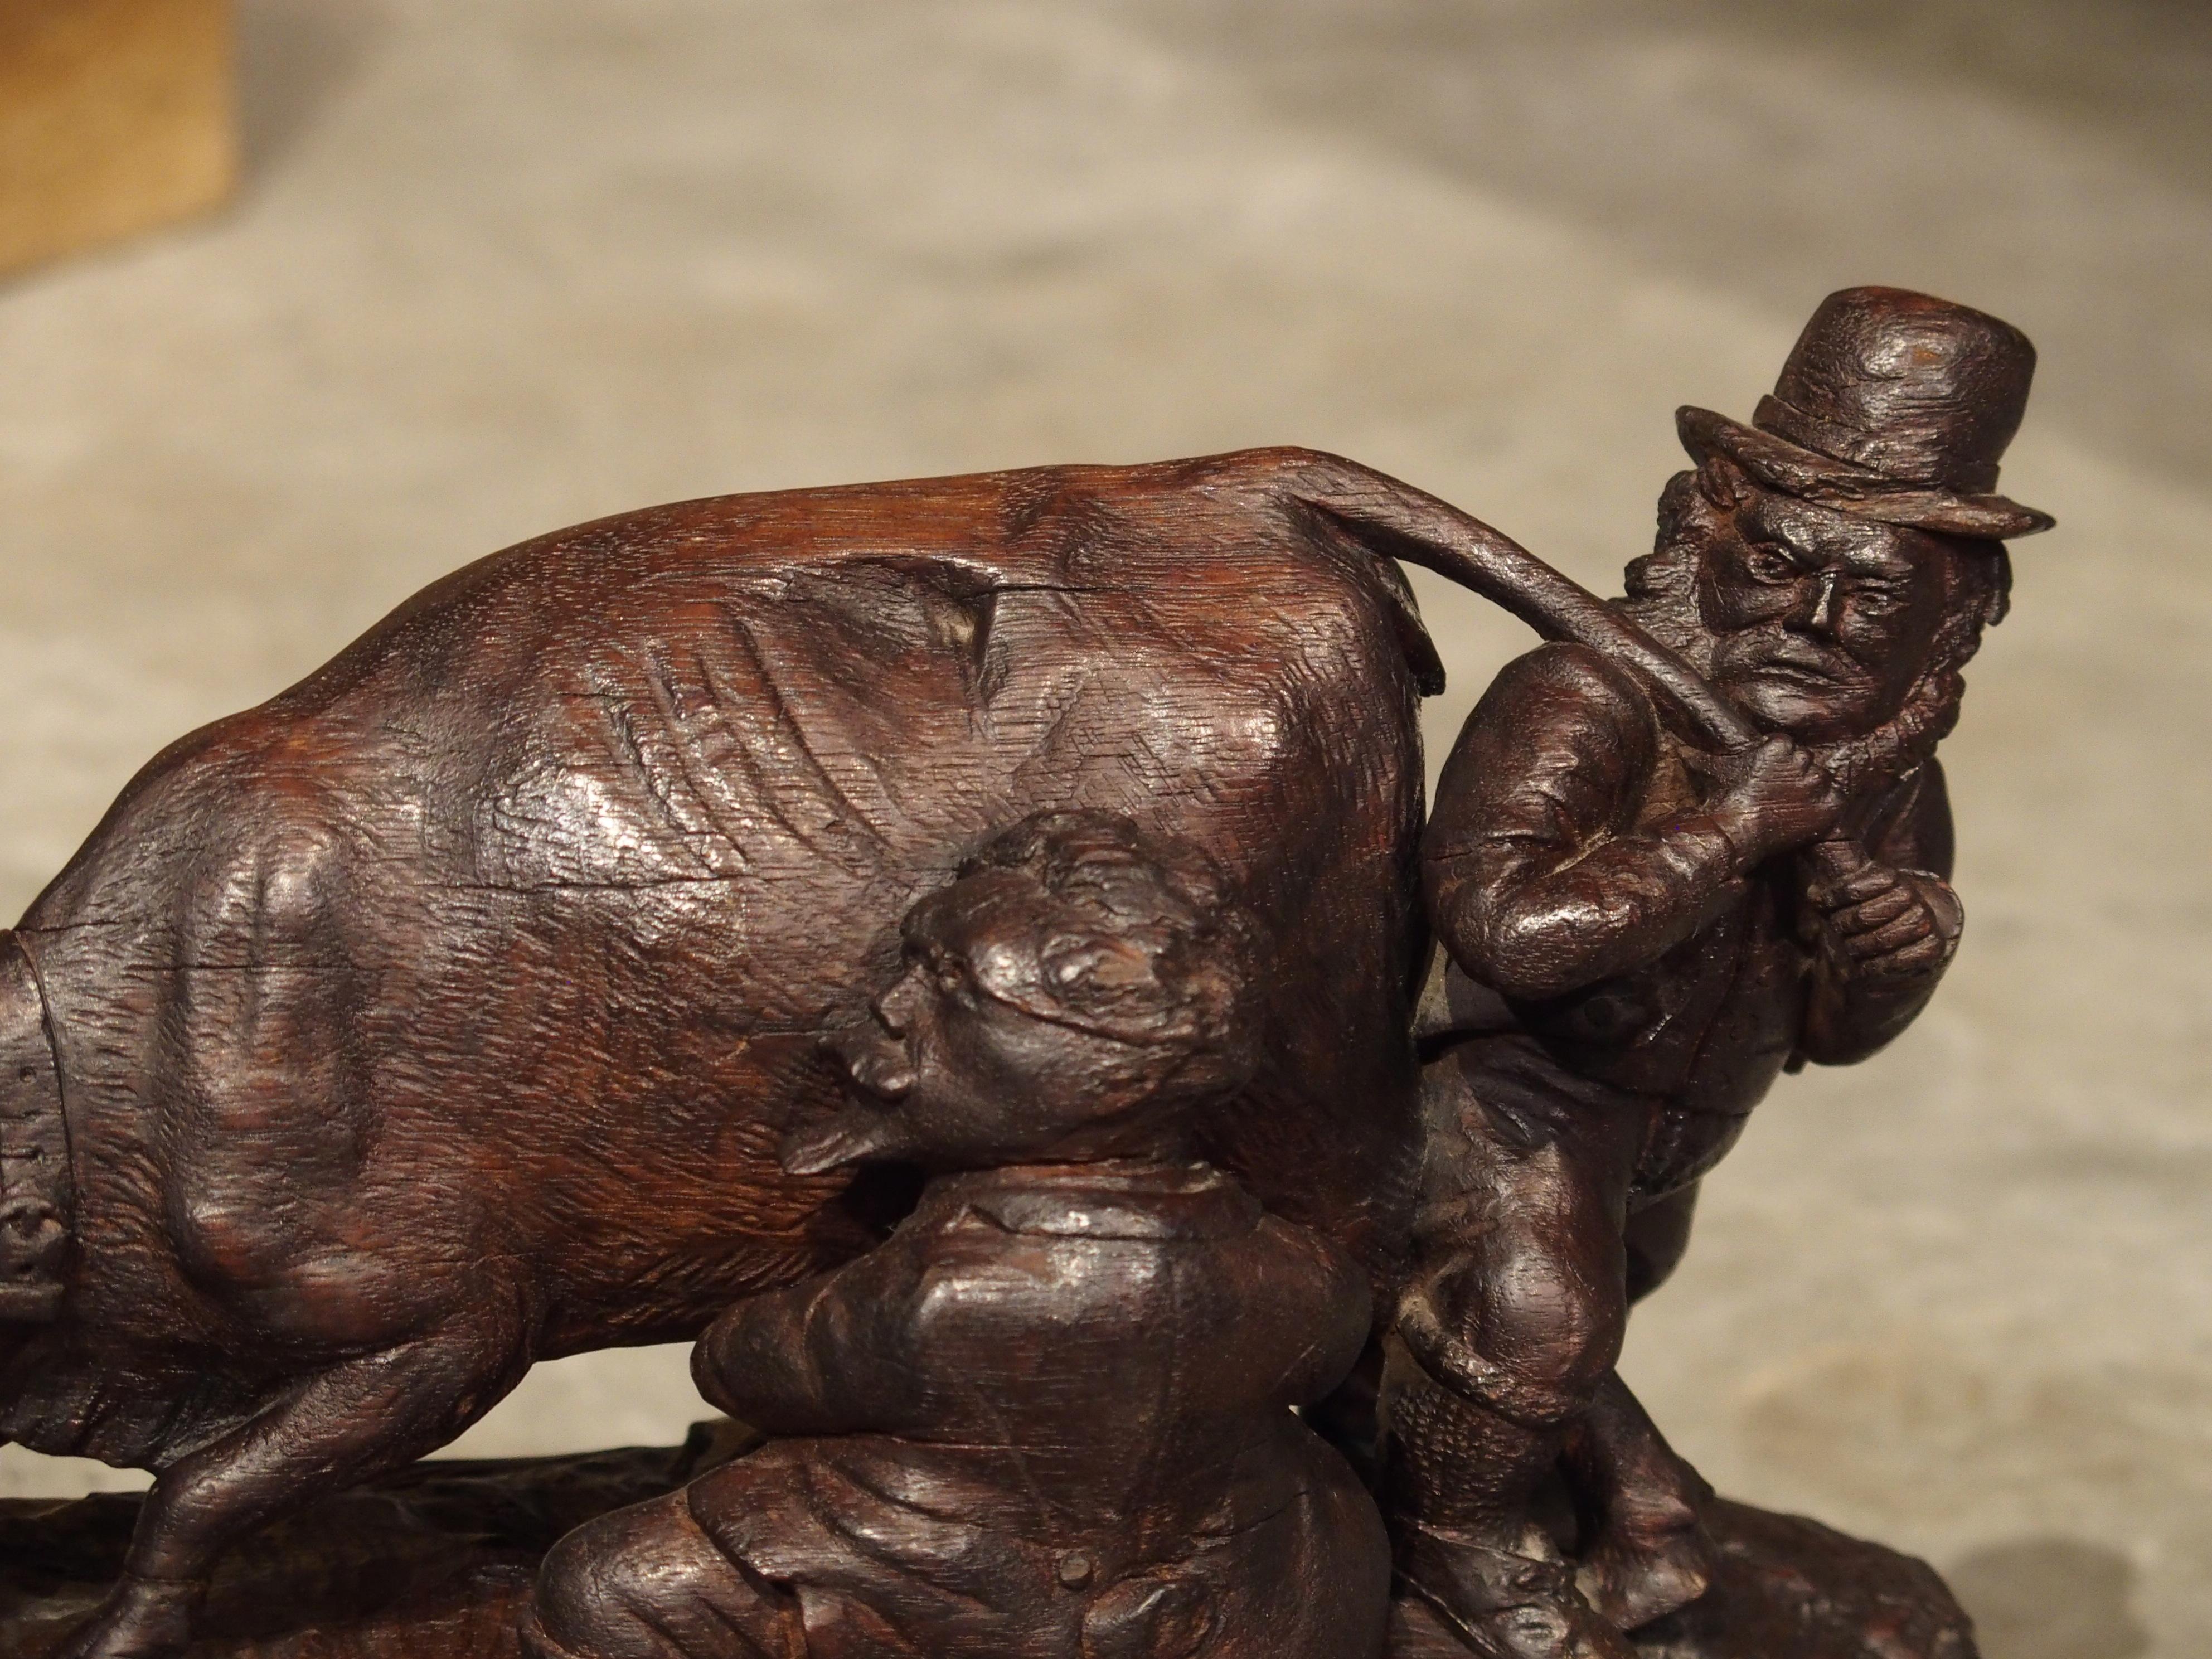 This intriguing Black Forest inkwell has been meticulously hand carved from wood and dates to 19th century Switzerland.

The piece depicts two men attempting to milk a cow. The man wearing a hat is struggling to control the cow by pulling on the